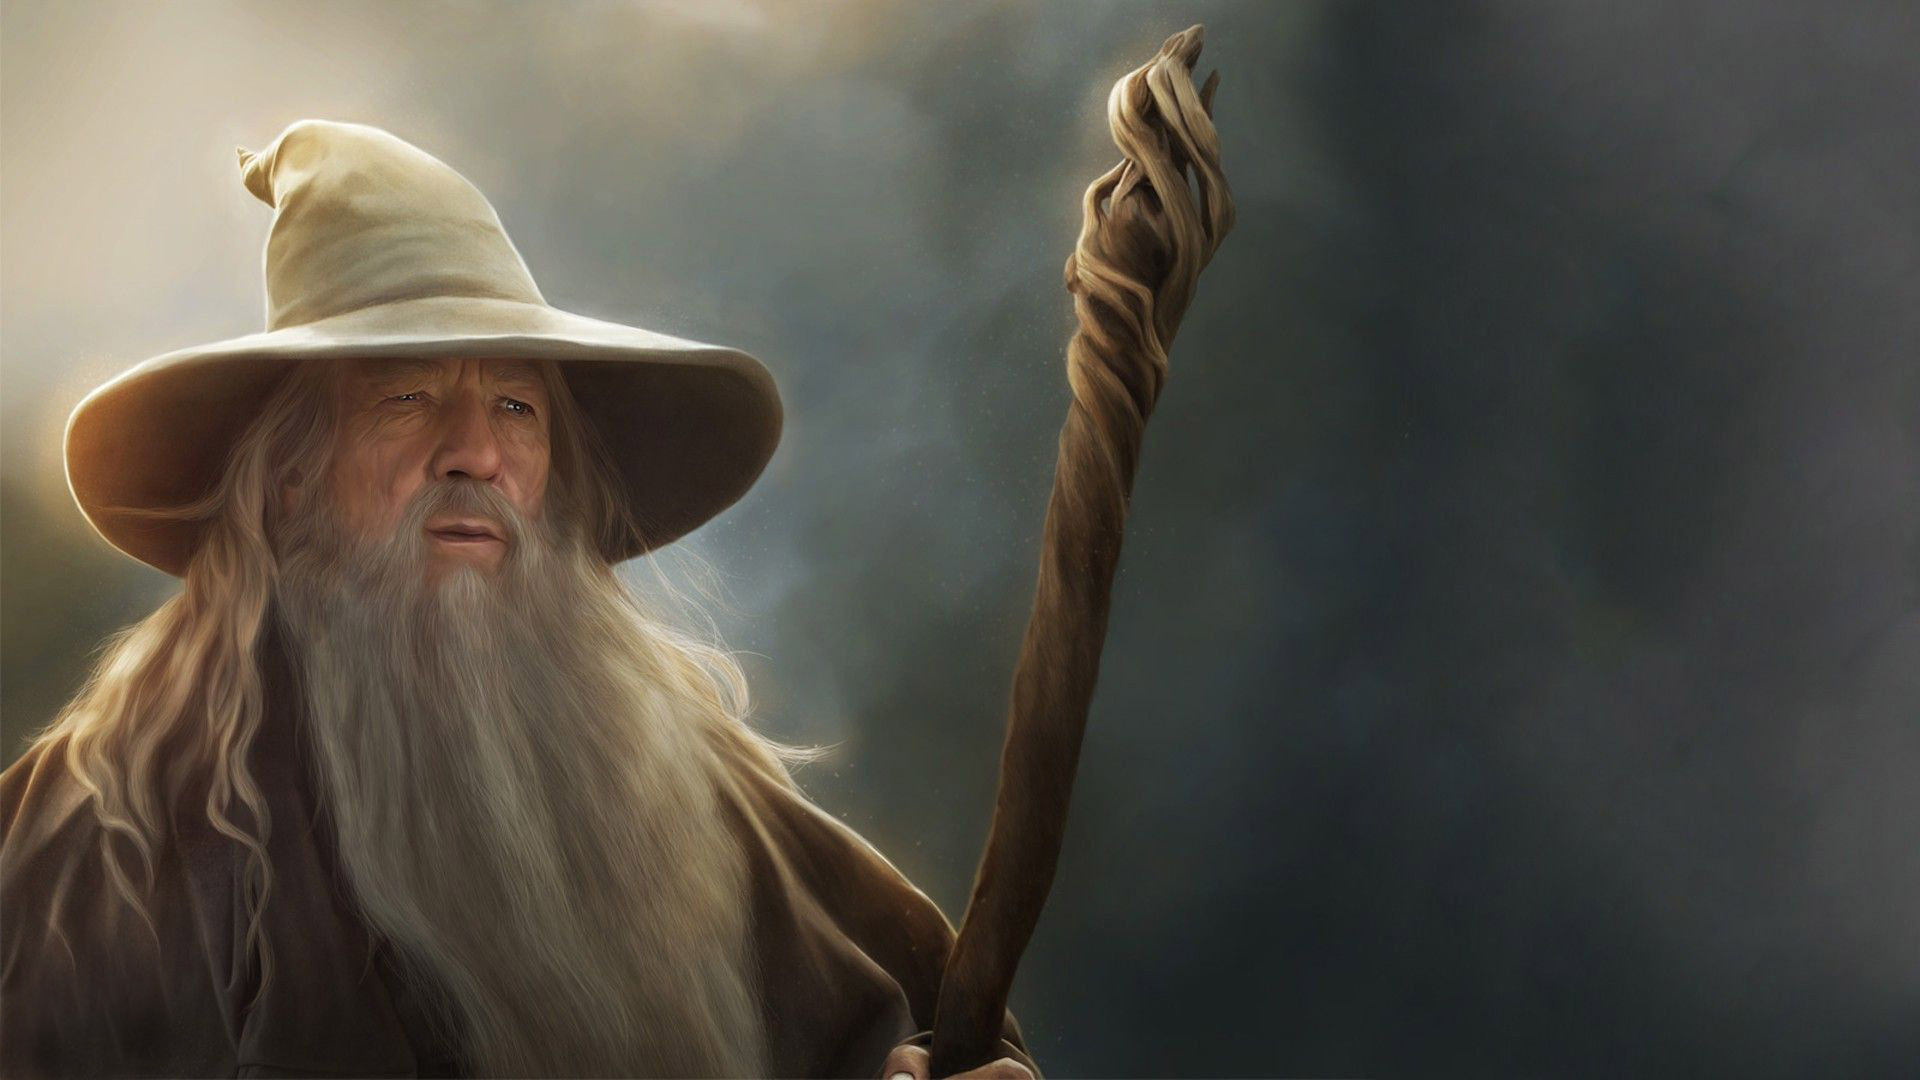 Gandalf   The Lord of the Rings wallpaper   1205998 1920x1080